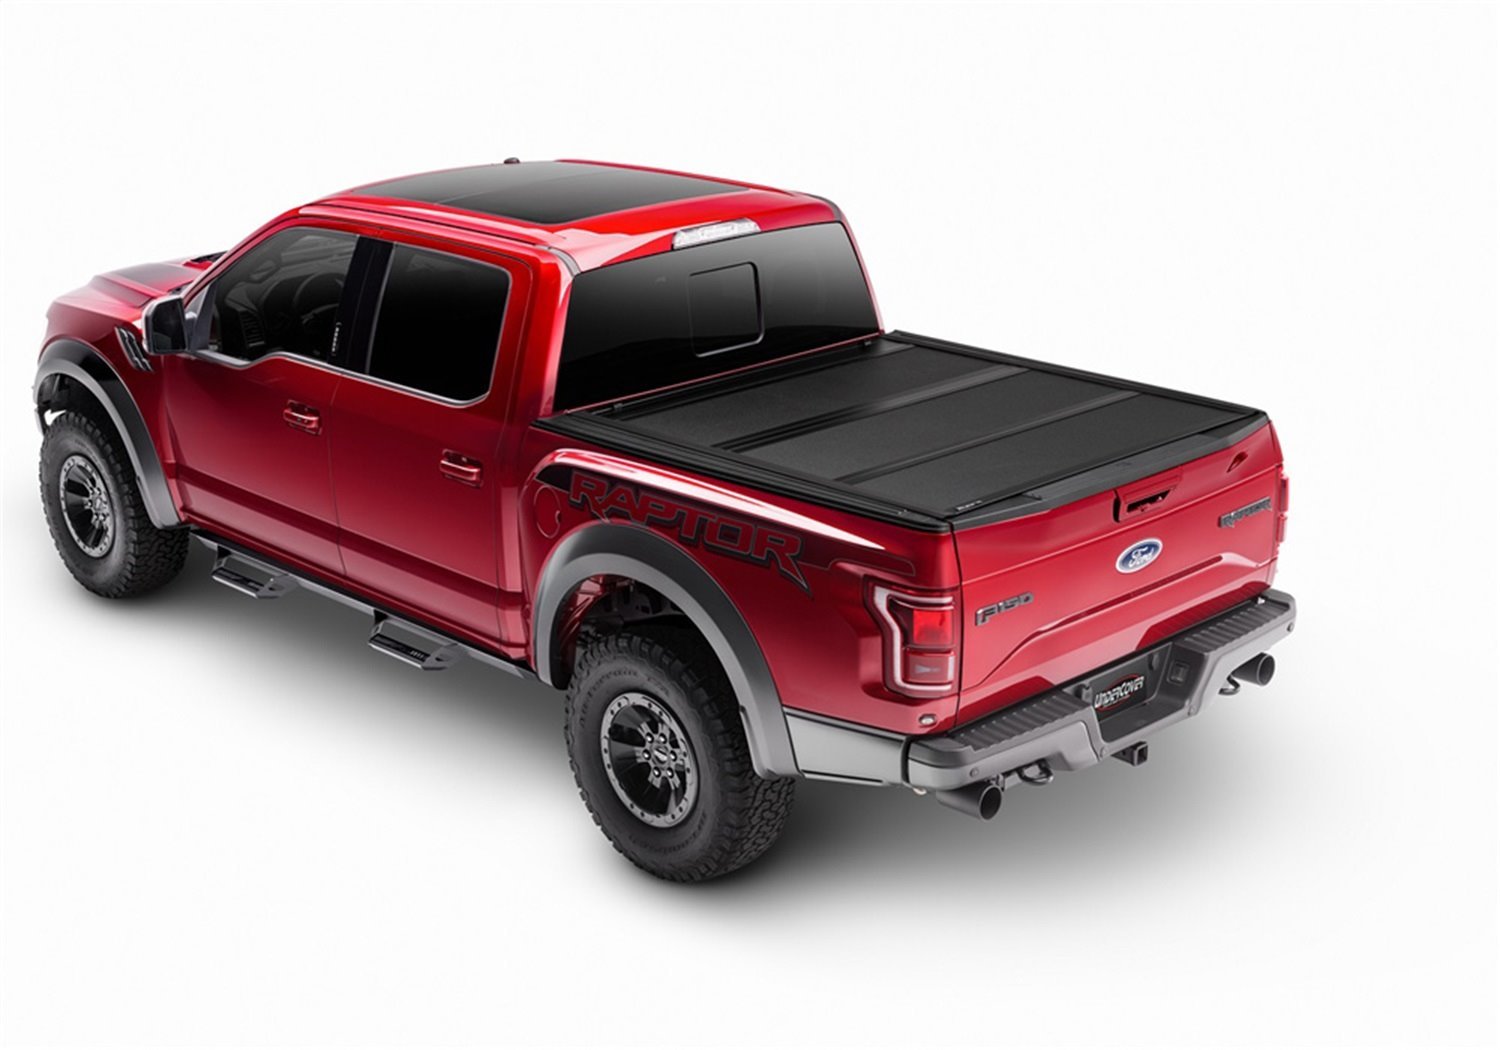 AX42014 Armor Flex Hard Folding Cover, Fits Select Toyota Tacoma 5'Bed Crew w/o Bedside Storage Boxes, Black Textured